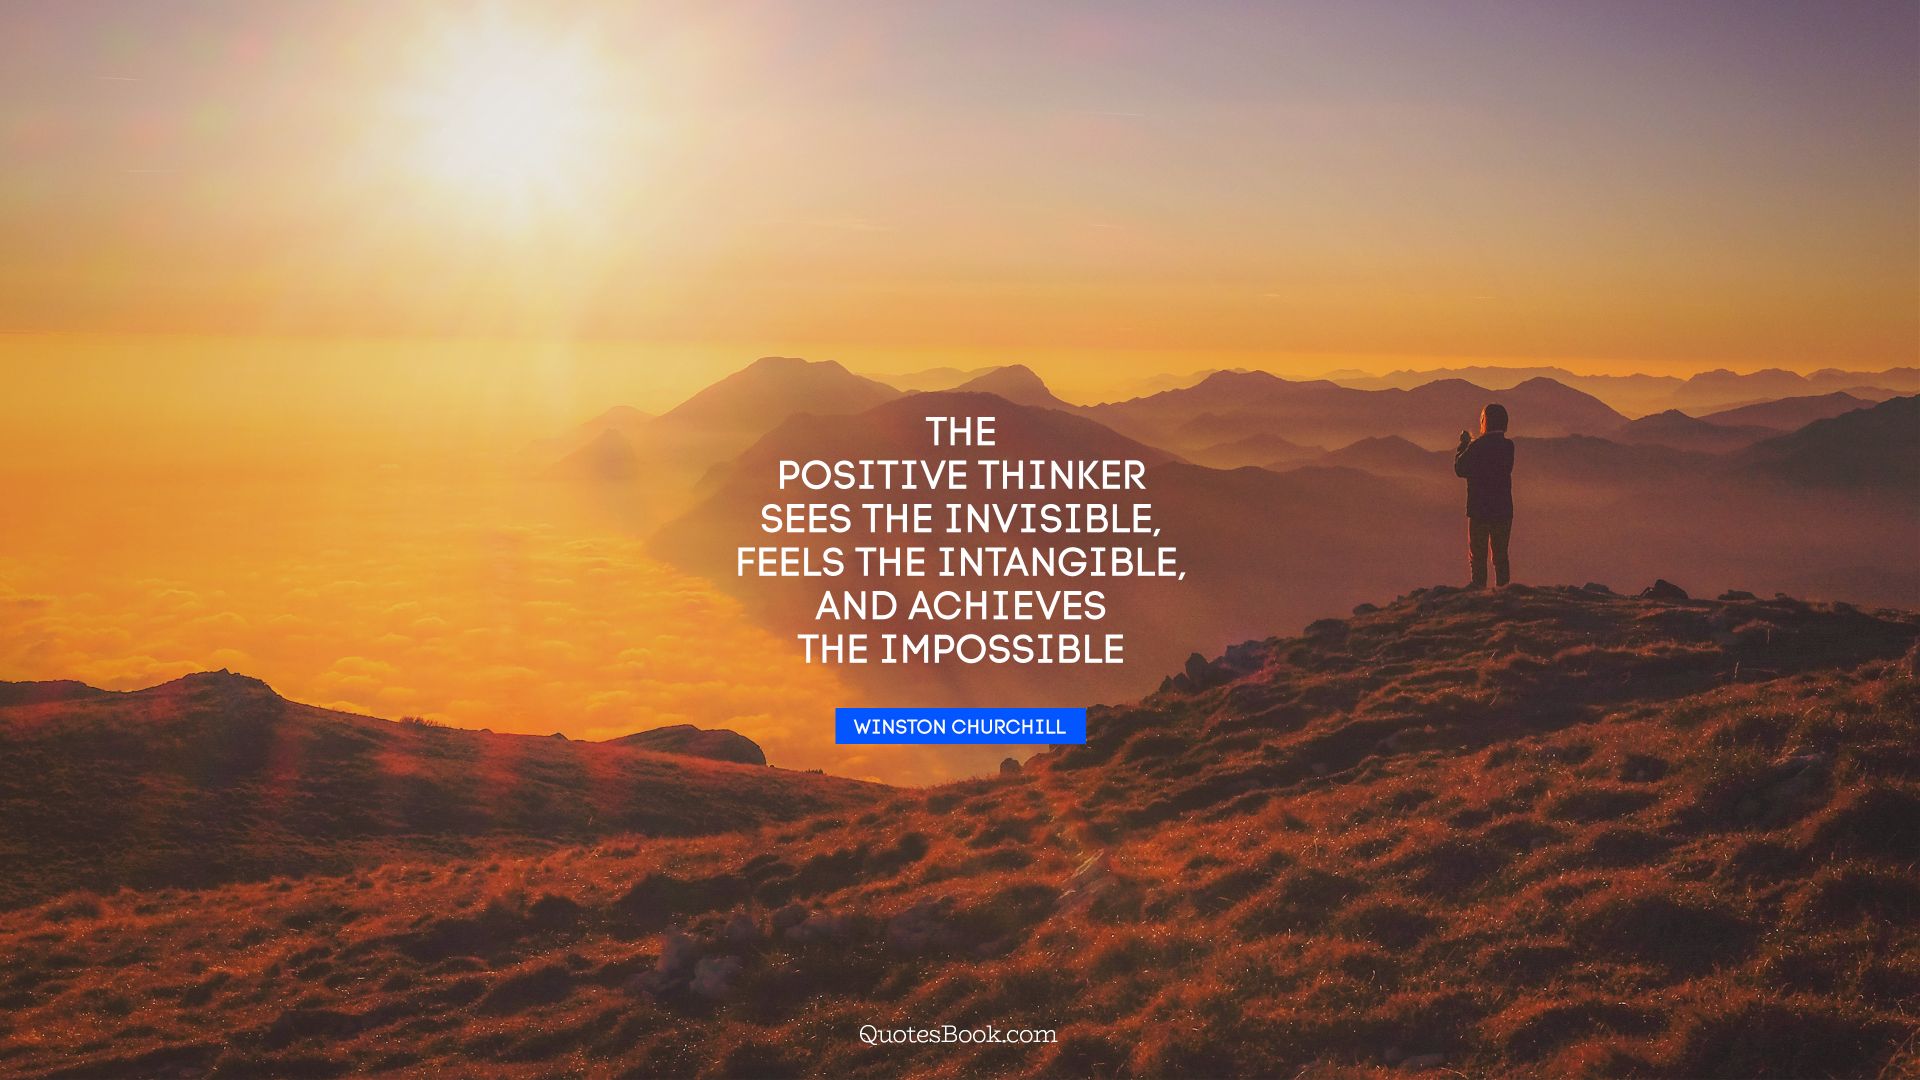 The positive thinker sees the invisible, feels the intangible, and achieves the impossible. - Quote by Winston Churchill